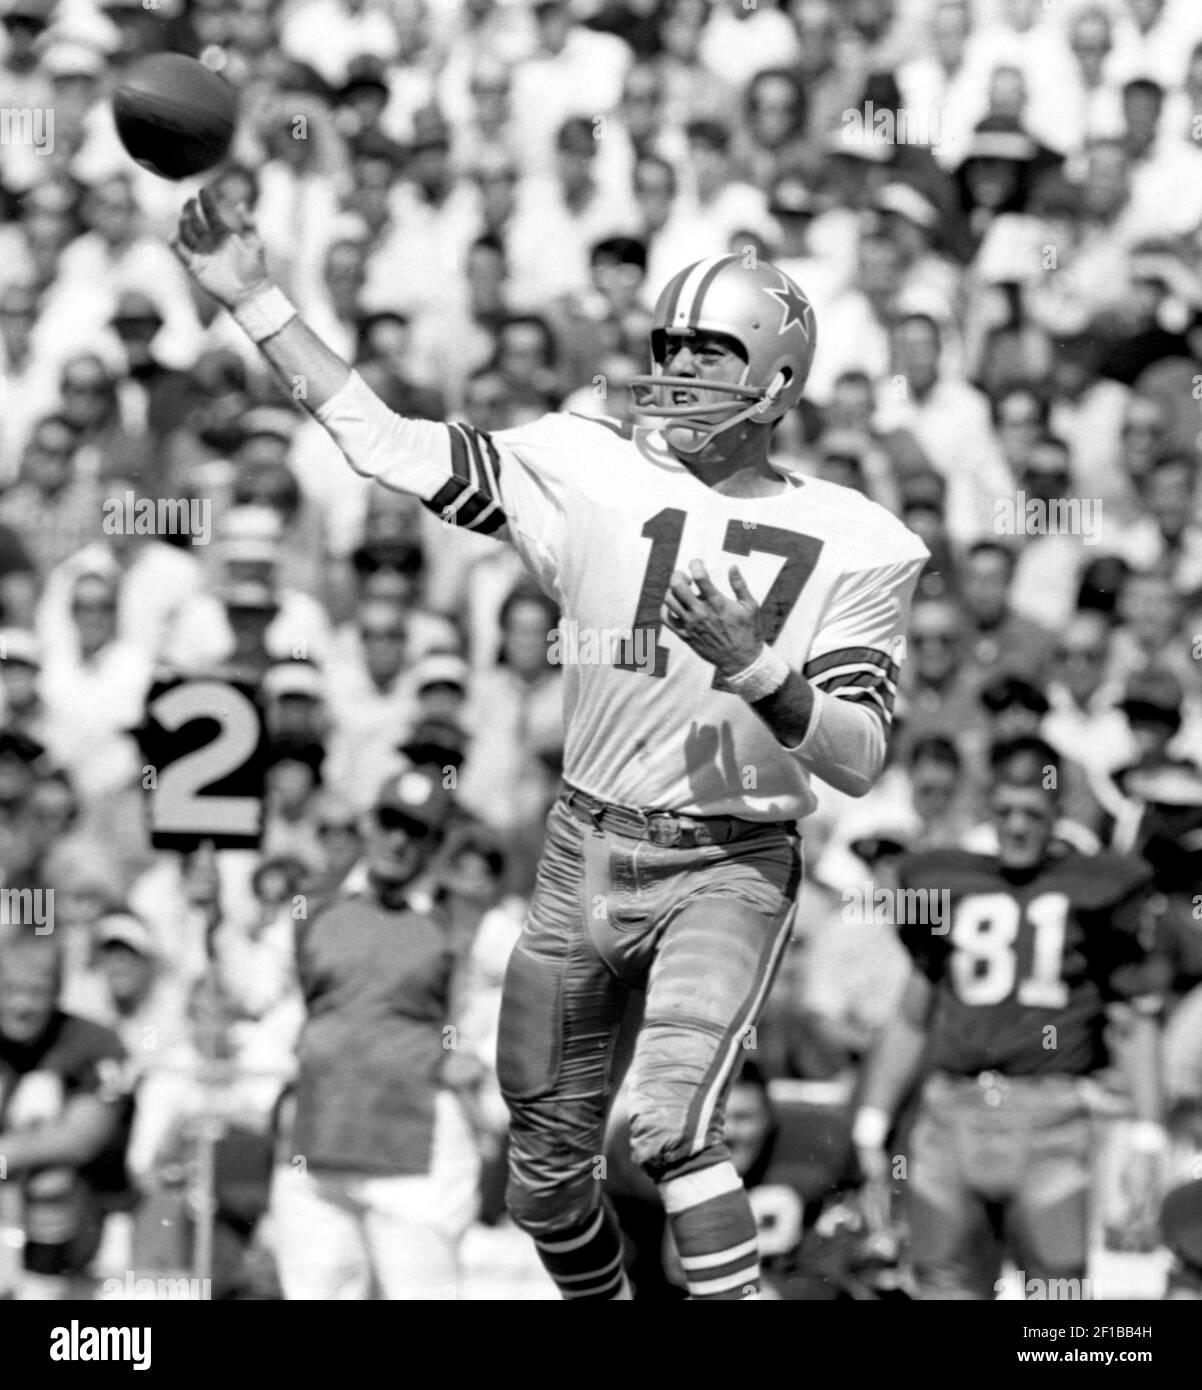 Dallas Cowboys quarterback Don Meredith throws against the Washington  Redskins September 26, 1965. The former quarterback and original member of  ABC's "Monday Night Football" died in Santa Fe, New Mexico,  after suffering